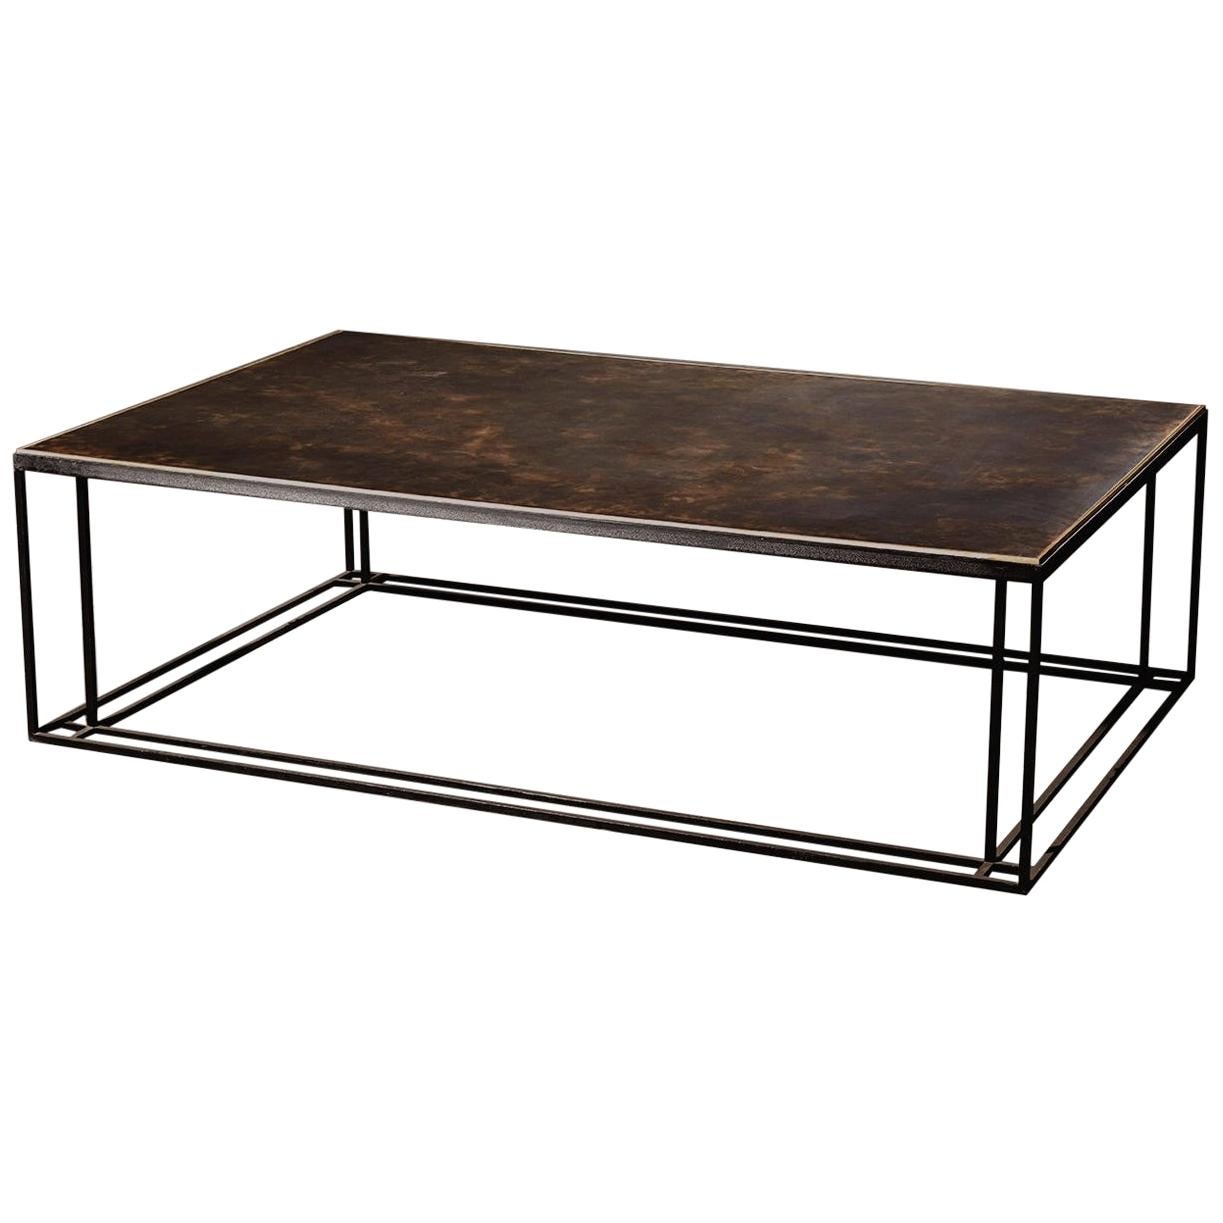 A coffee table in blackened steel and honed Cumbrian slate, with a polished brass trim. Hand crafted to order in the North. Bespoke finishes and sizes are available.

Measures: 120cm width x 80cm depth x 35cm height.
Custom finishes and sizes